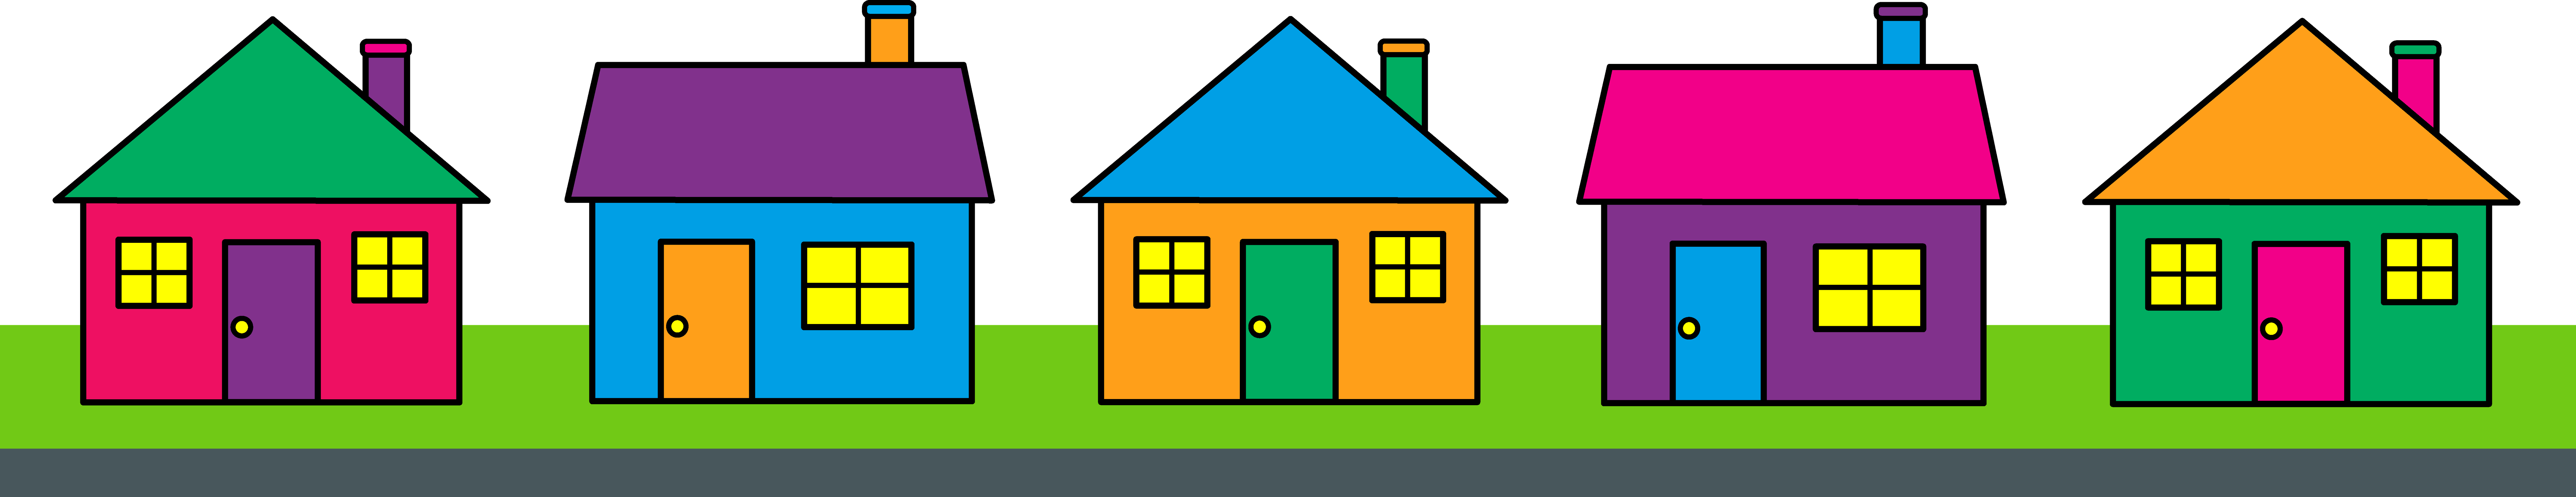 Colorful house cliparts zone. Neighborhood clipart social